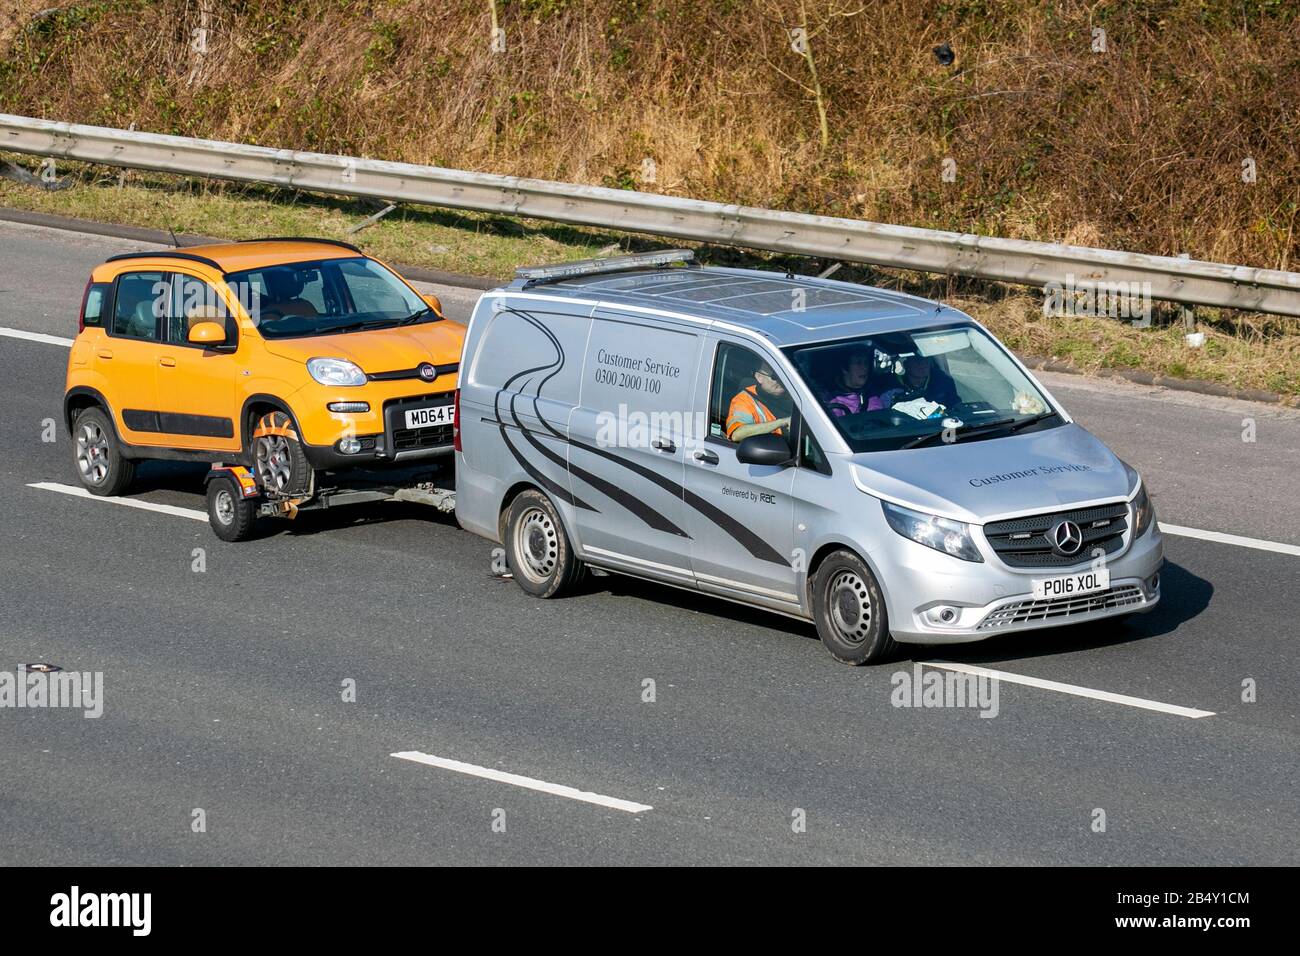 Orange FIAT 500 being towed by RAC  2016 Mercedes-Benz Vito 116 Bluetec; Customer service UK vehicular traffic, transport, modern vehicles, saloon cars, vehicles, vehicle, roads, motors, motoring south-bound on the M6 motorway highway Stock Photo